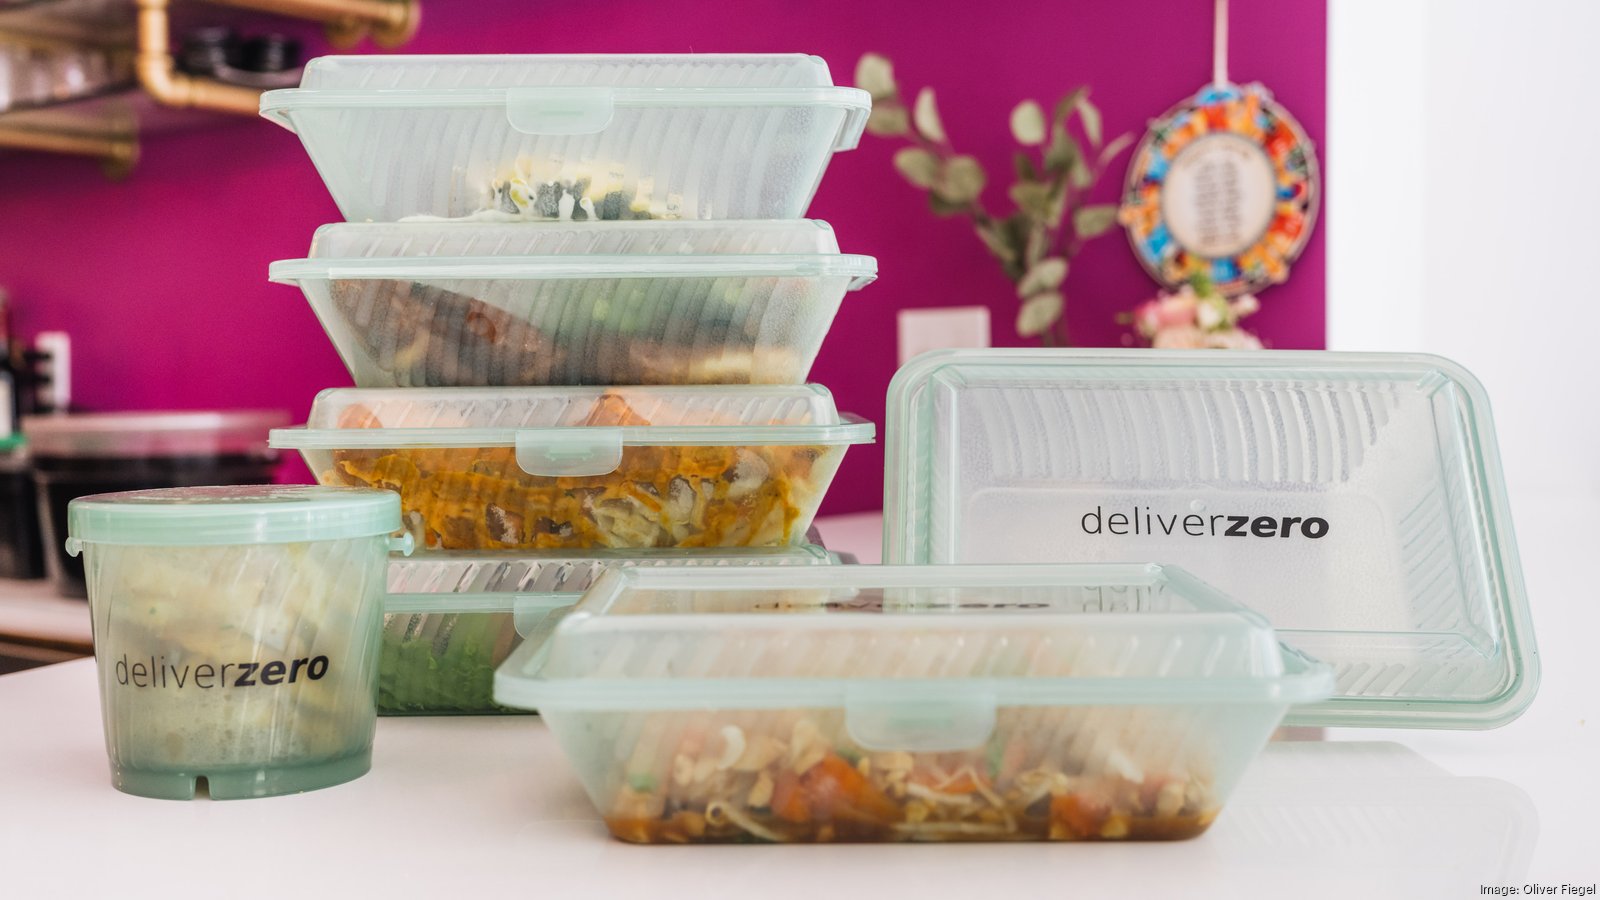 New reusable meal prep containers arrived in the mail! : r